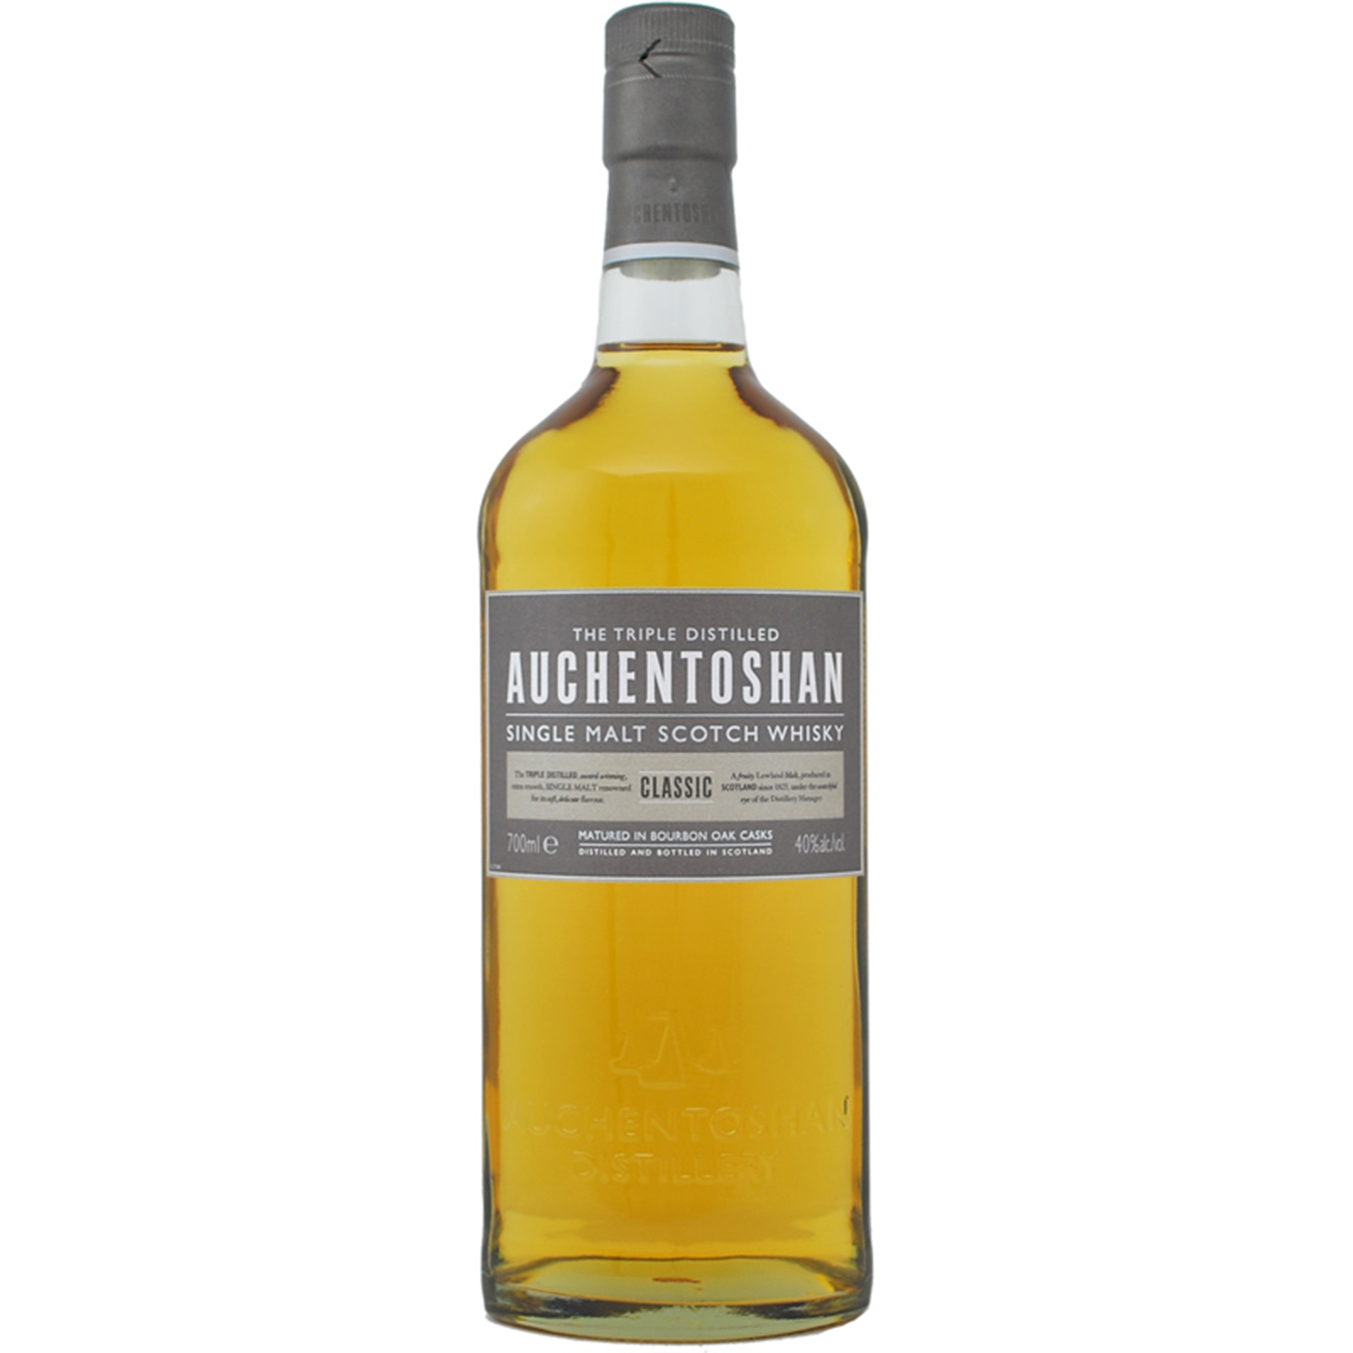 You are currently viewing Auchentoshan Classic